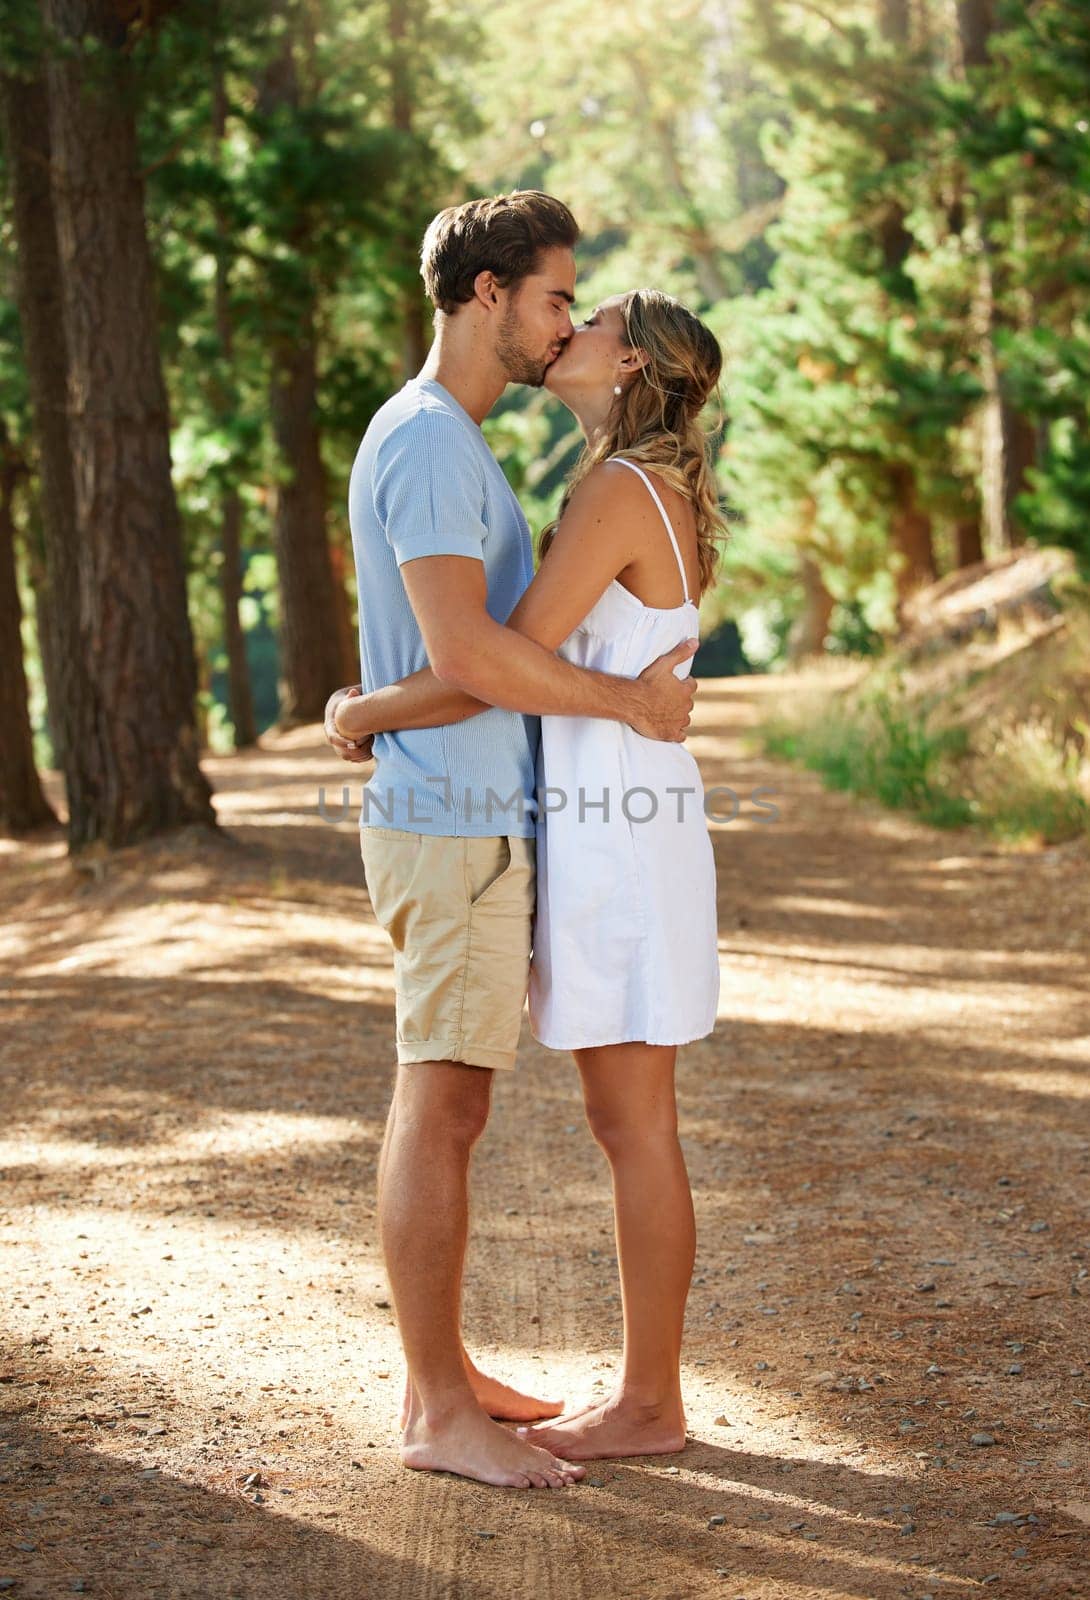 Couple kiss, love and hug in forest, summer with freedom and adventure, relationship with affection and care outdoor. People together in nature park, commitment and trust with romance and bonding by YuriArcurs